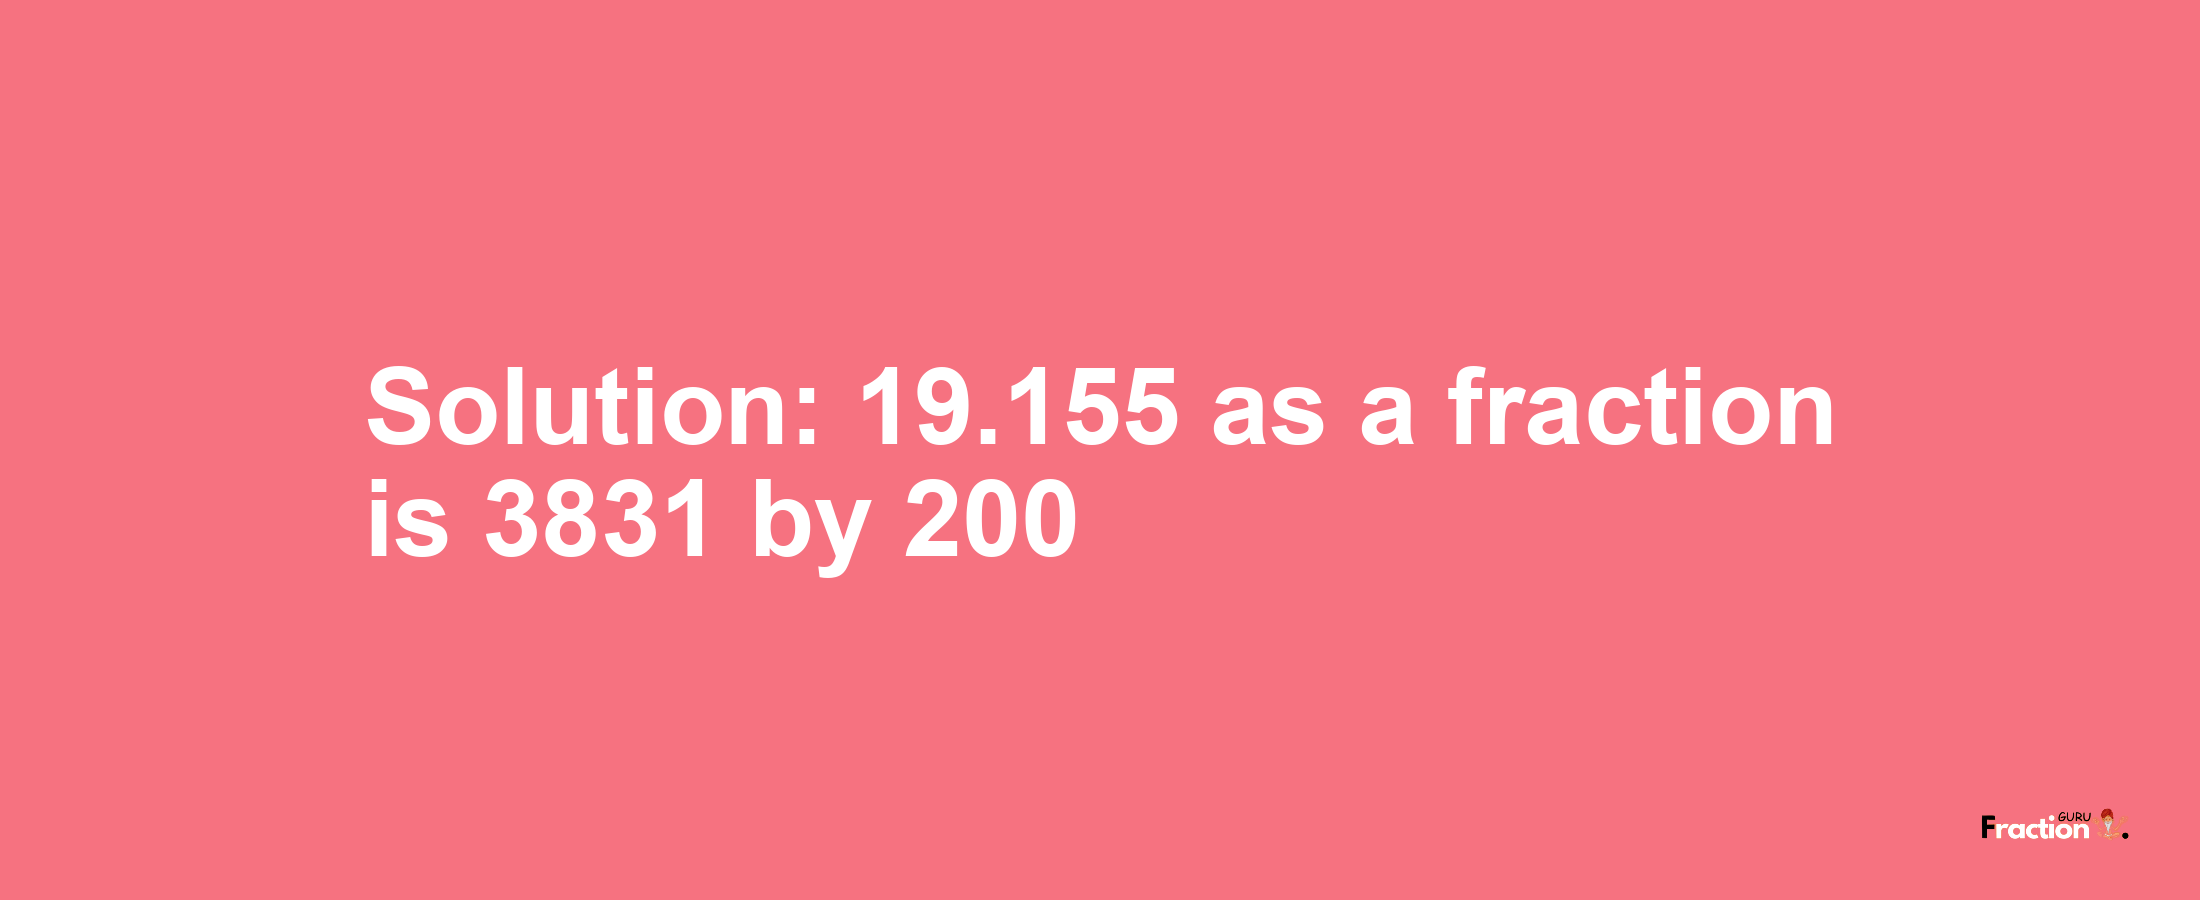 Solution:19.155 as a fraction is 3831/200